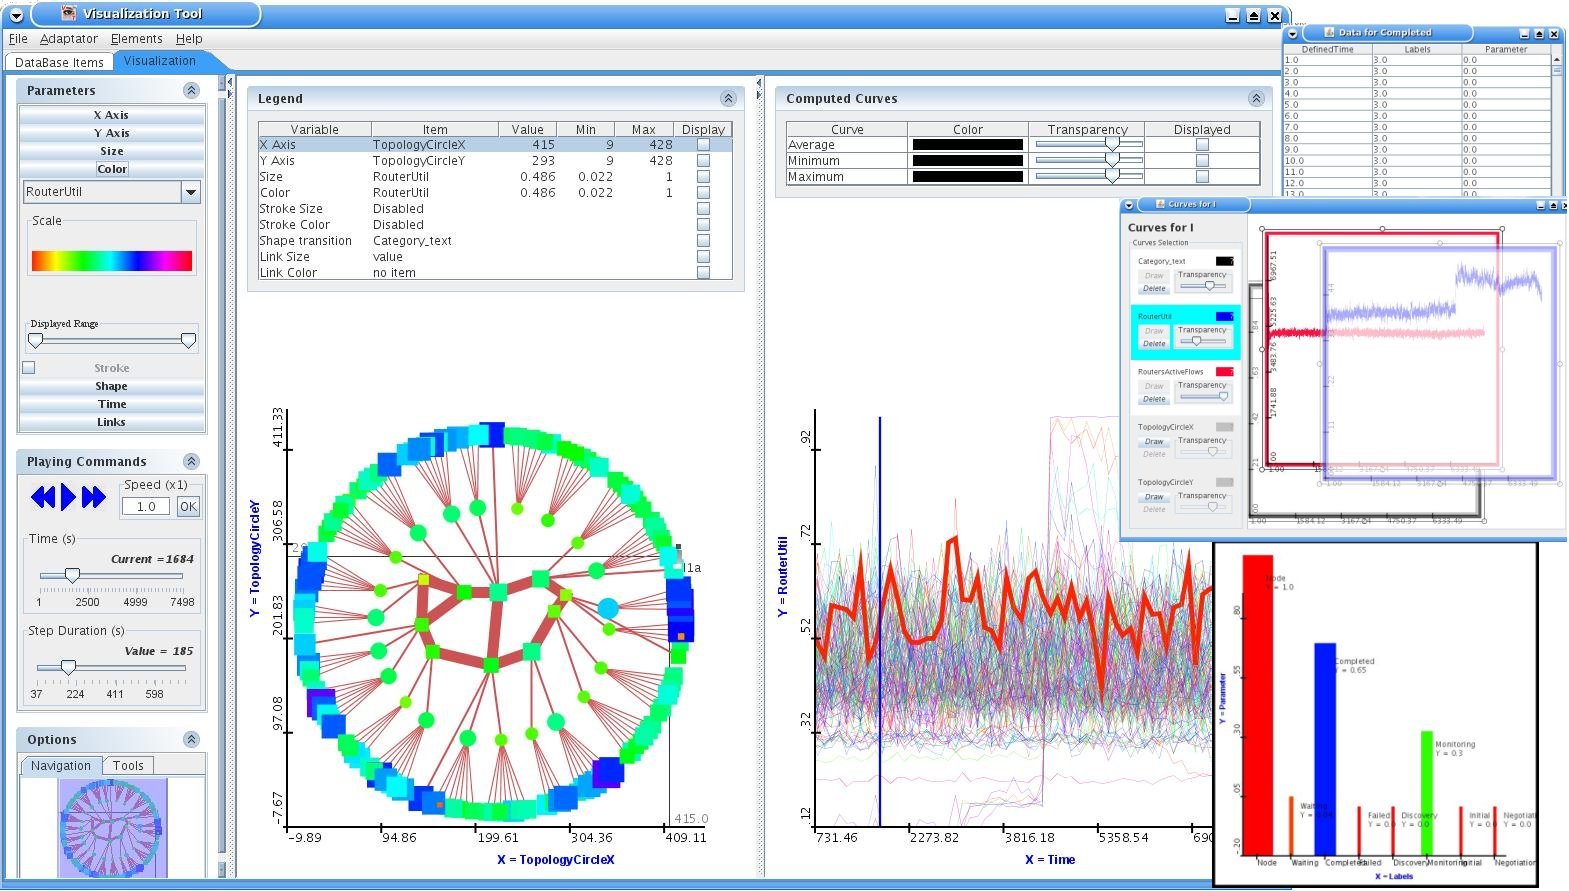  Figure 1: One frame from an animated visualization of a simulation of the "Abilene" network. On the left panel, the innermost nodes are the backbone routers, the next ring represents the subnet routers, and the outermost ring shows the leaf routers. On the right panel, the time series curves of the routers (one is currently selected) are displayed. On the right side, different options available: numeric data display (top); superposed time series curves (middle); and diagram view (bottom).  